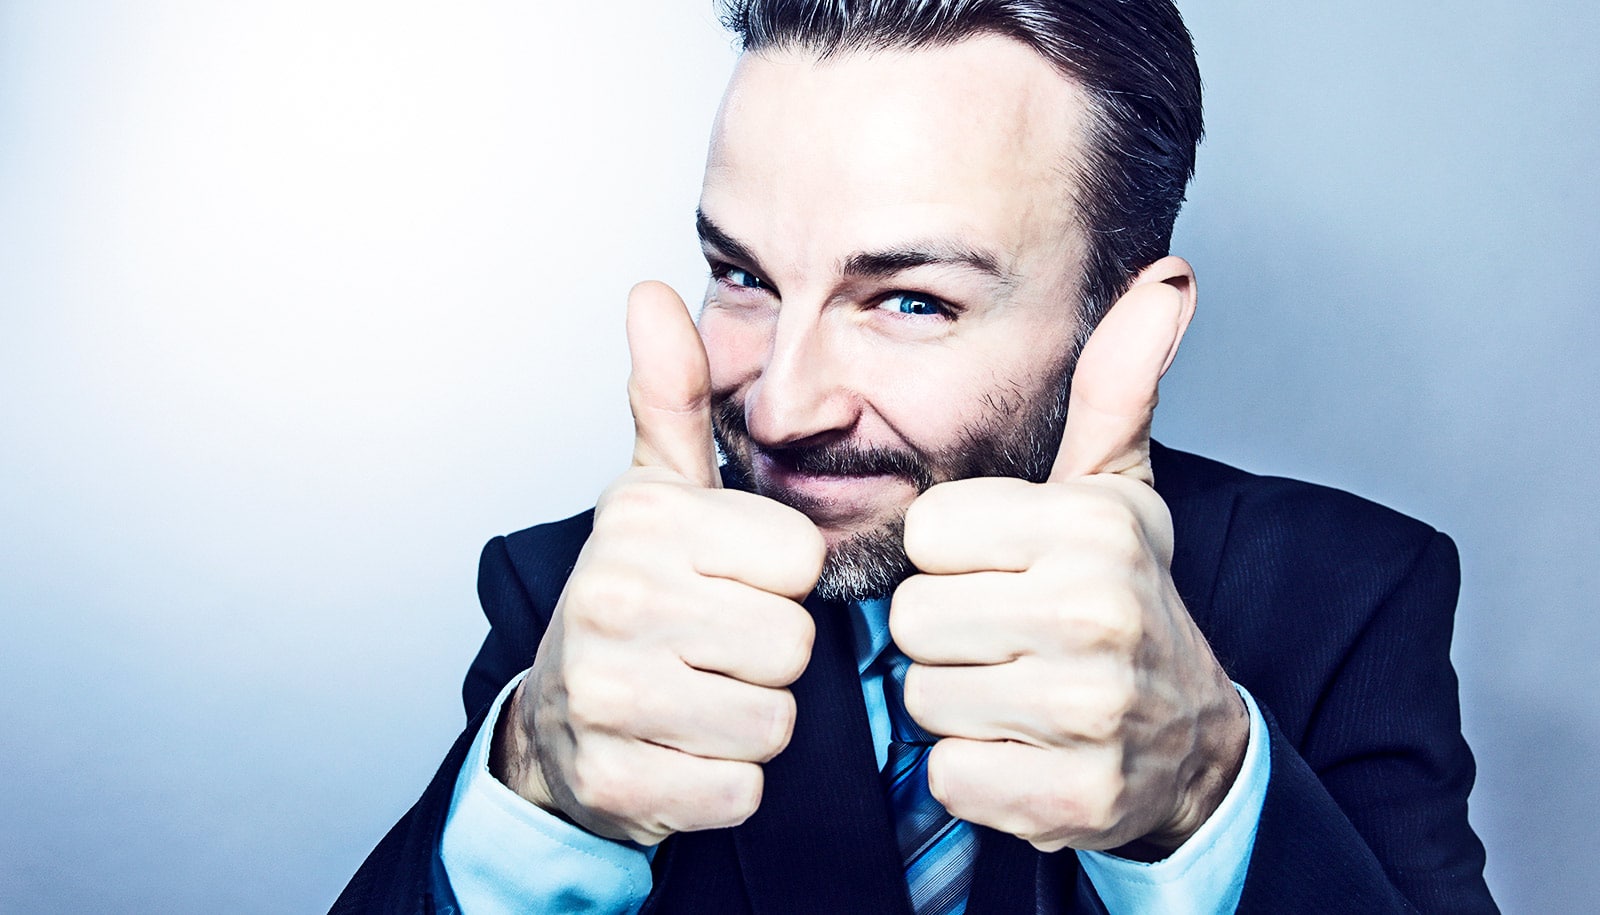 A businessman in a suit gives a double thumbs up and smiles at the camera.